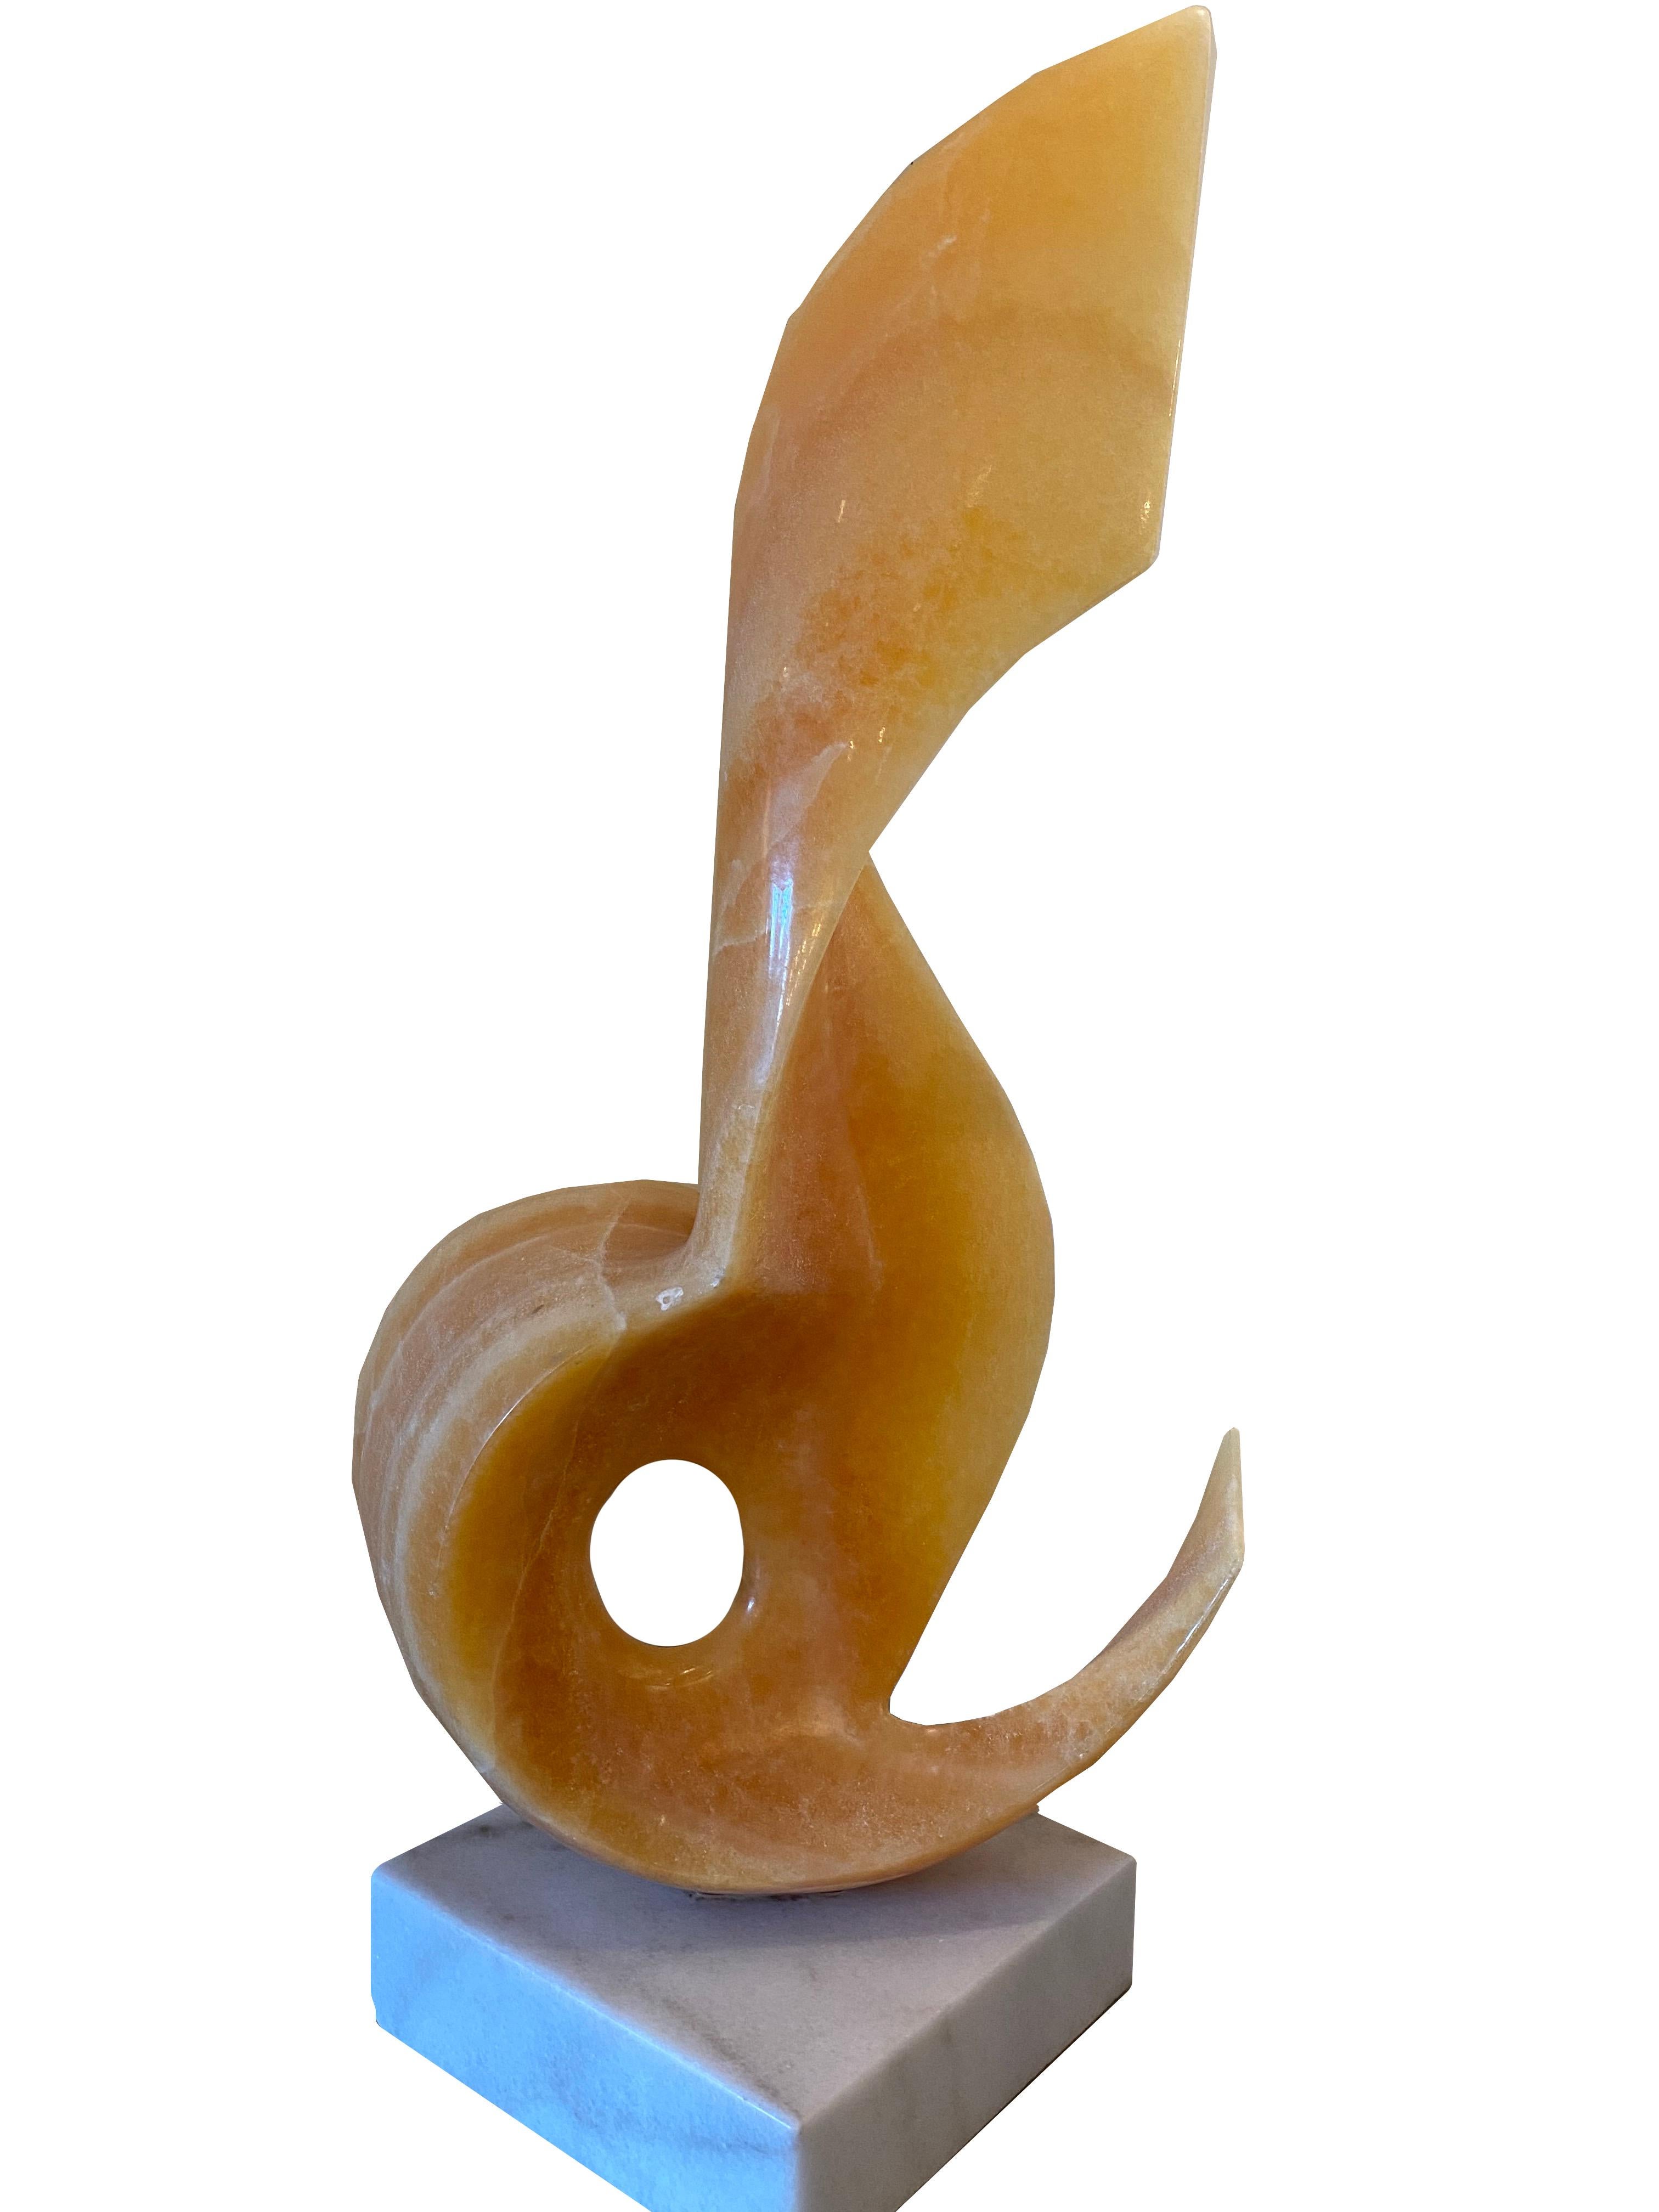 A unique hand-carved stone sculpture by Mexican abstract artist, Leonardo Nierman.

La Flama by Leonardo Nierman, Mexican (1932)
Onyx Sculpture
Size: 32 x 9.5 x 9.5 in. (81.28 x 24.13 x 24.13 cm)